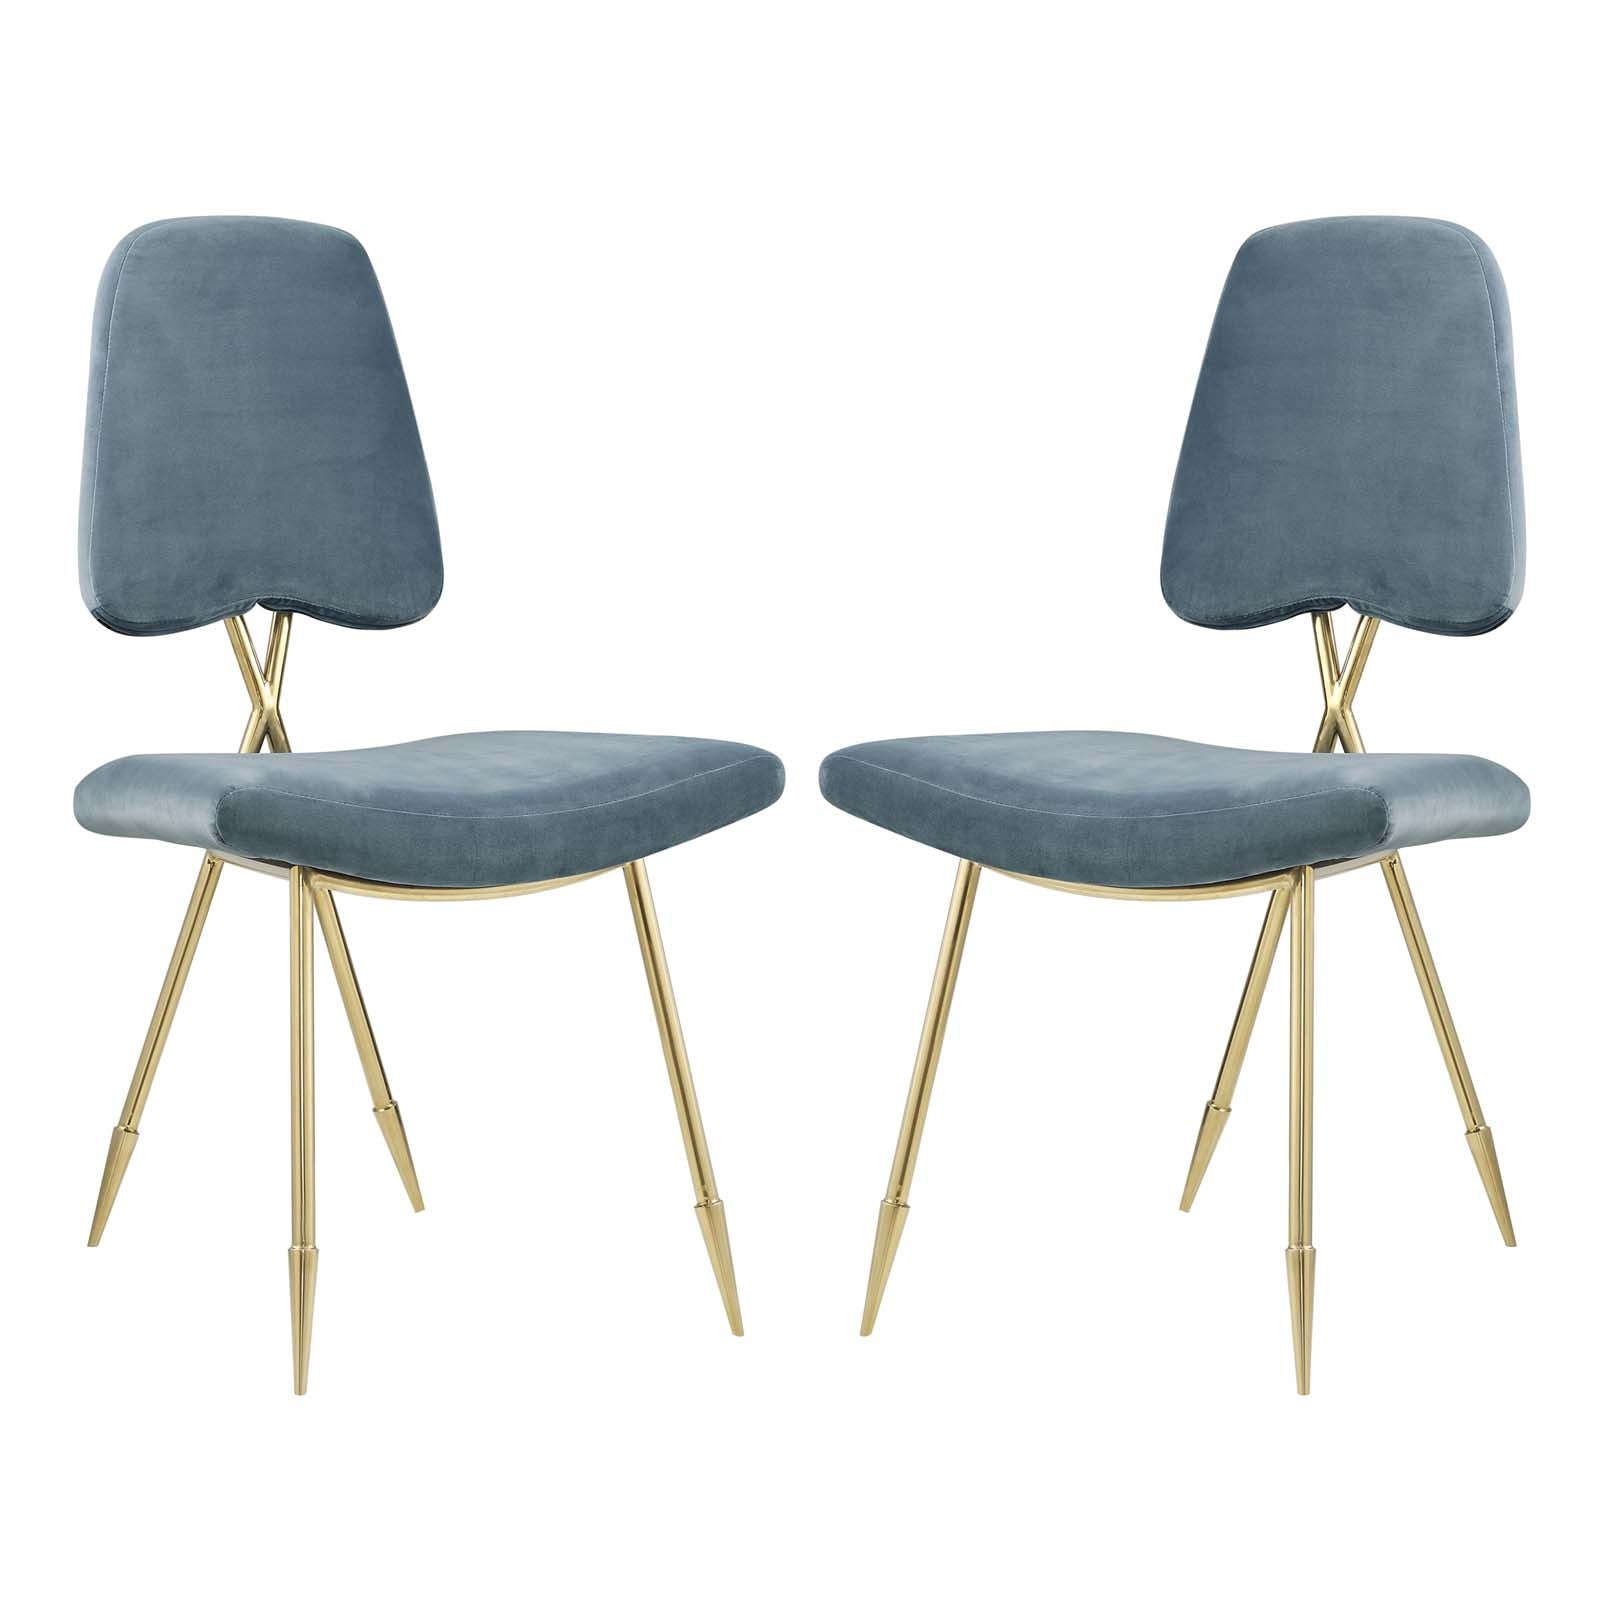 Ponder Dining Side Chair Set of 2 - East Shore Modern Home Furnishings